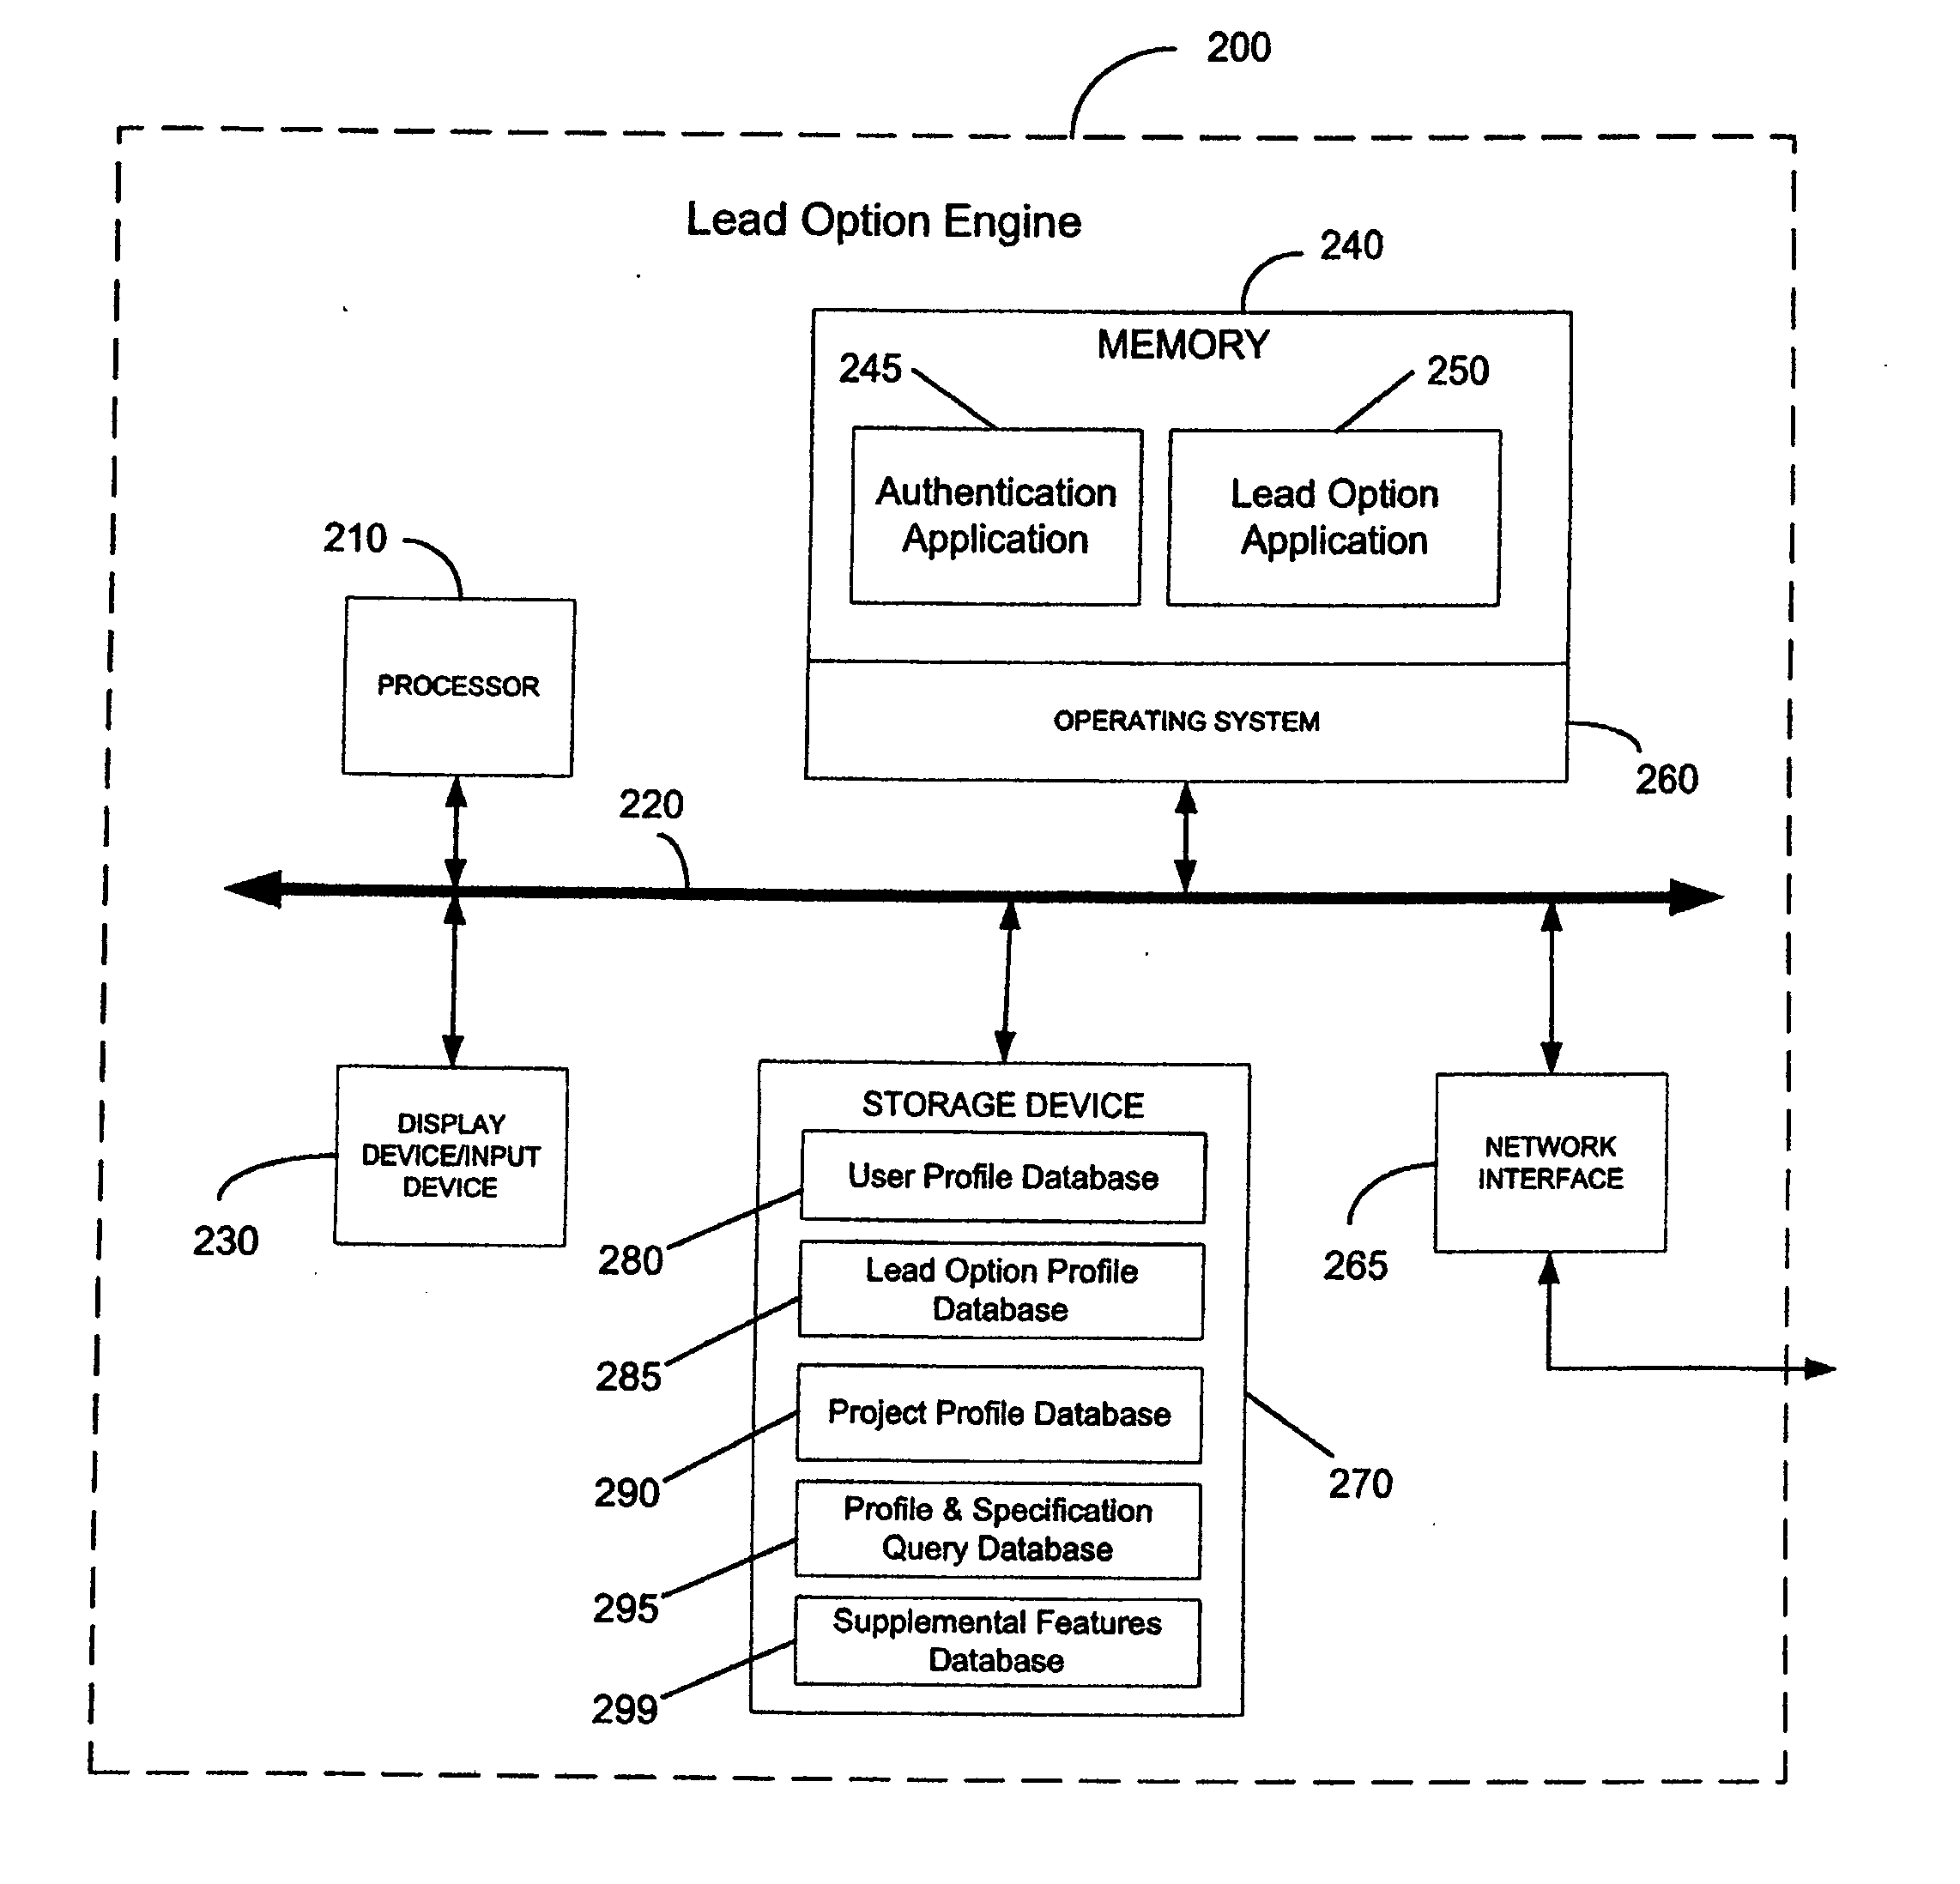 Systems, methods, and computer program products facilitating real-time transactions through the purchase of lead options